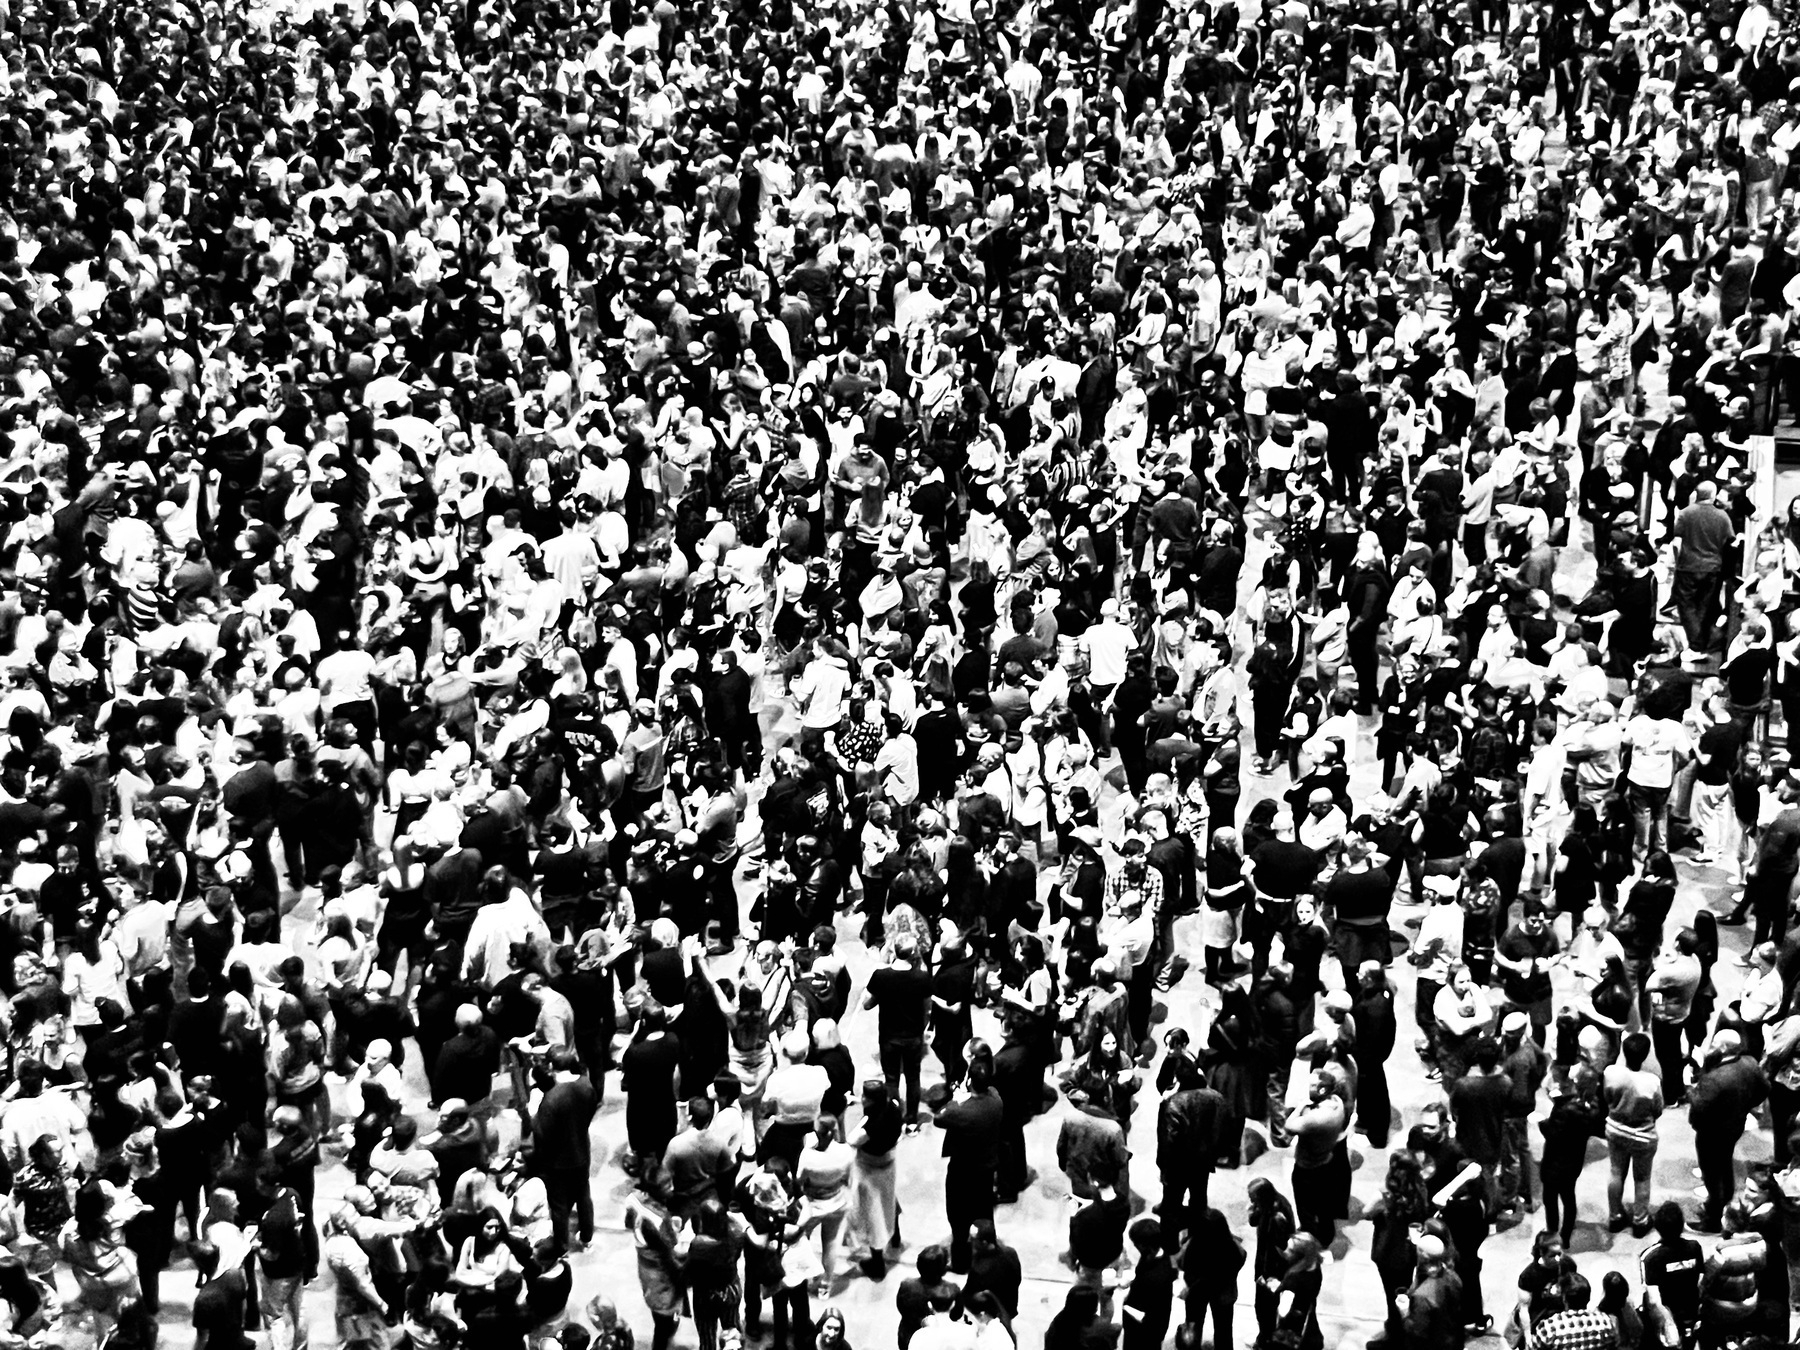 A large crowd of people with obscured faces